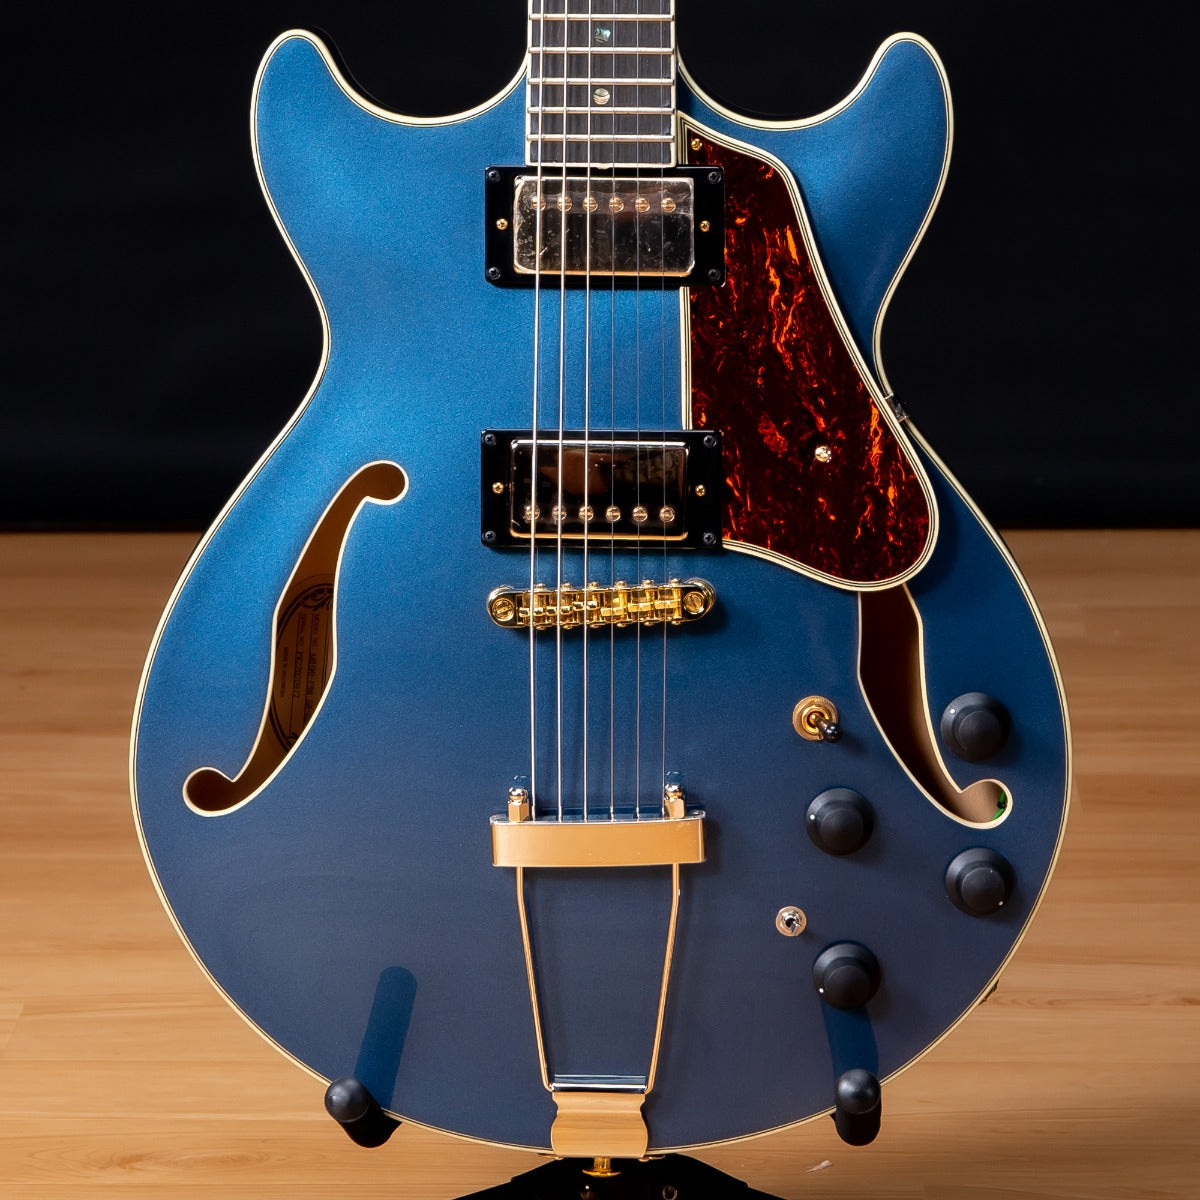 Ibanez AMH90 AM Artcore Expressionist Semi-Hollow Electric Guitar - Prussian Blue Metallic view 1